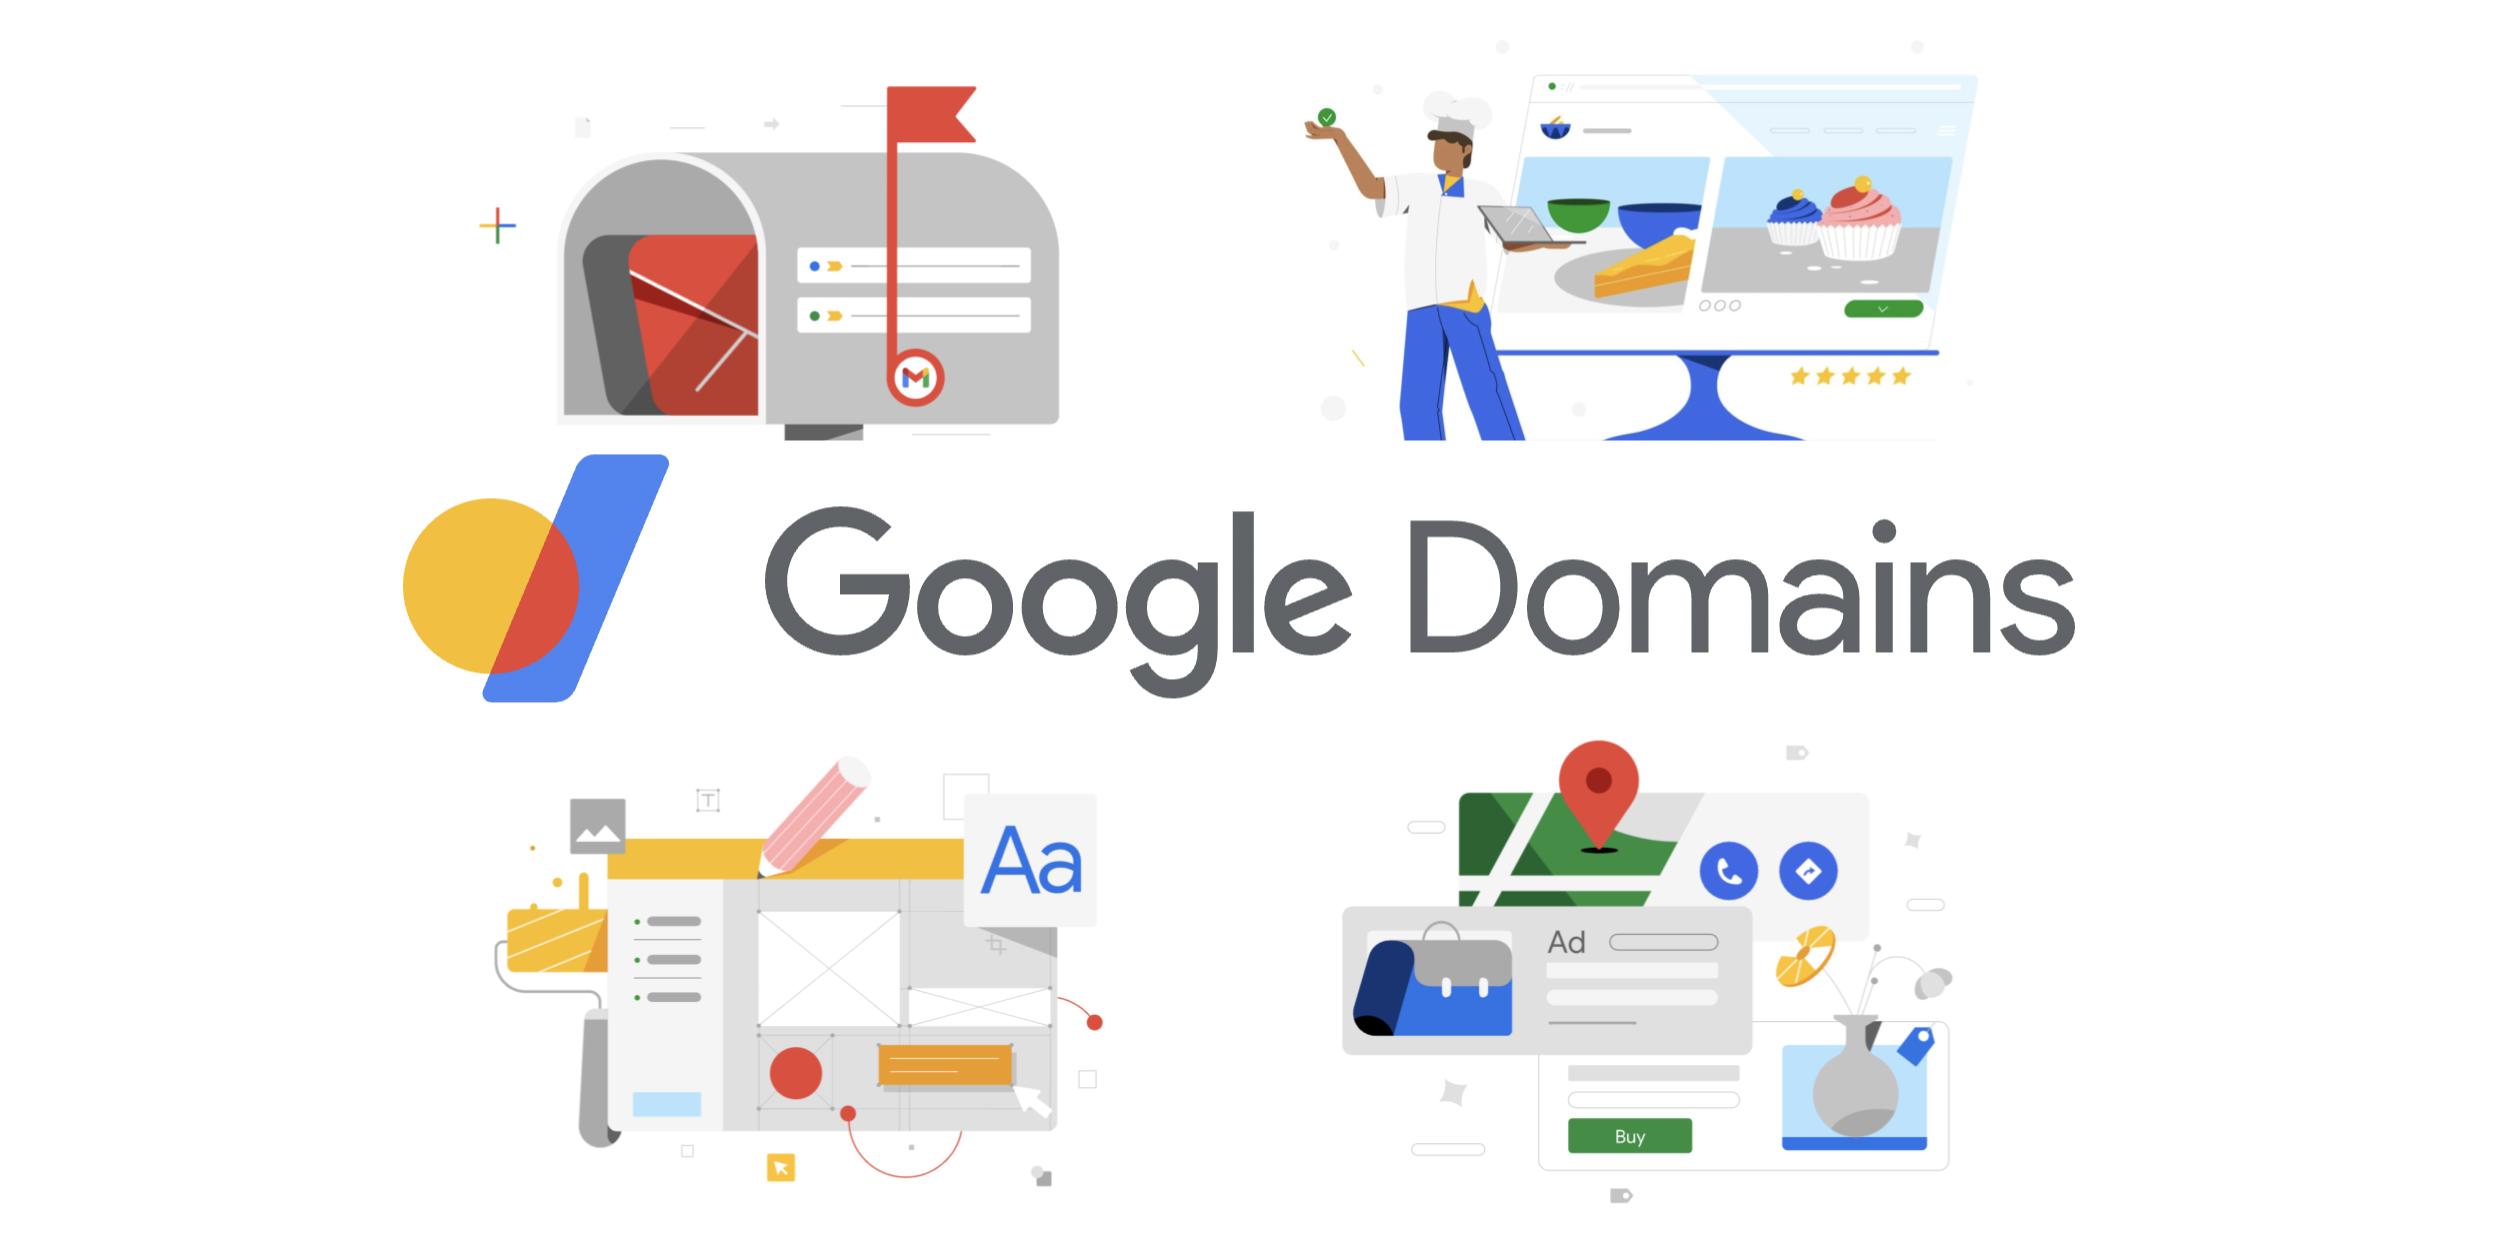 RIP Google Domains - Exploring New Digital Homes for Our Domains